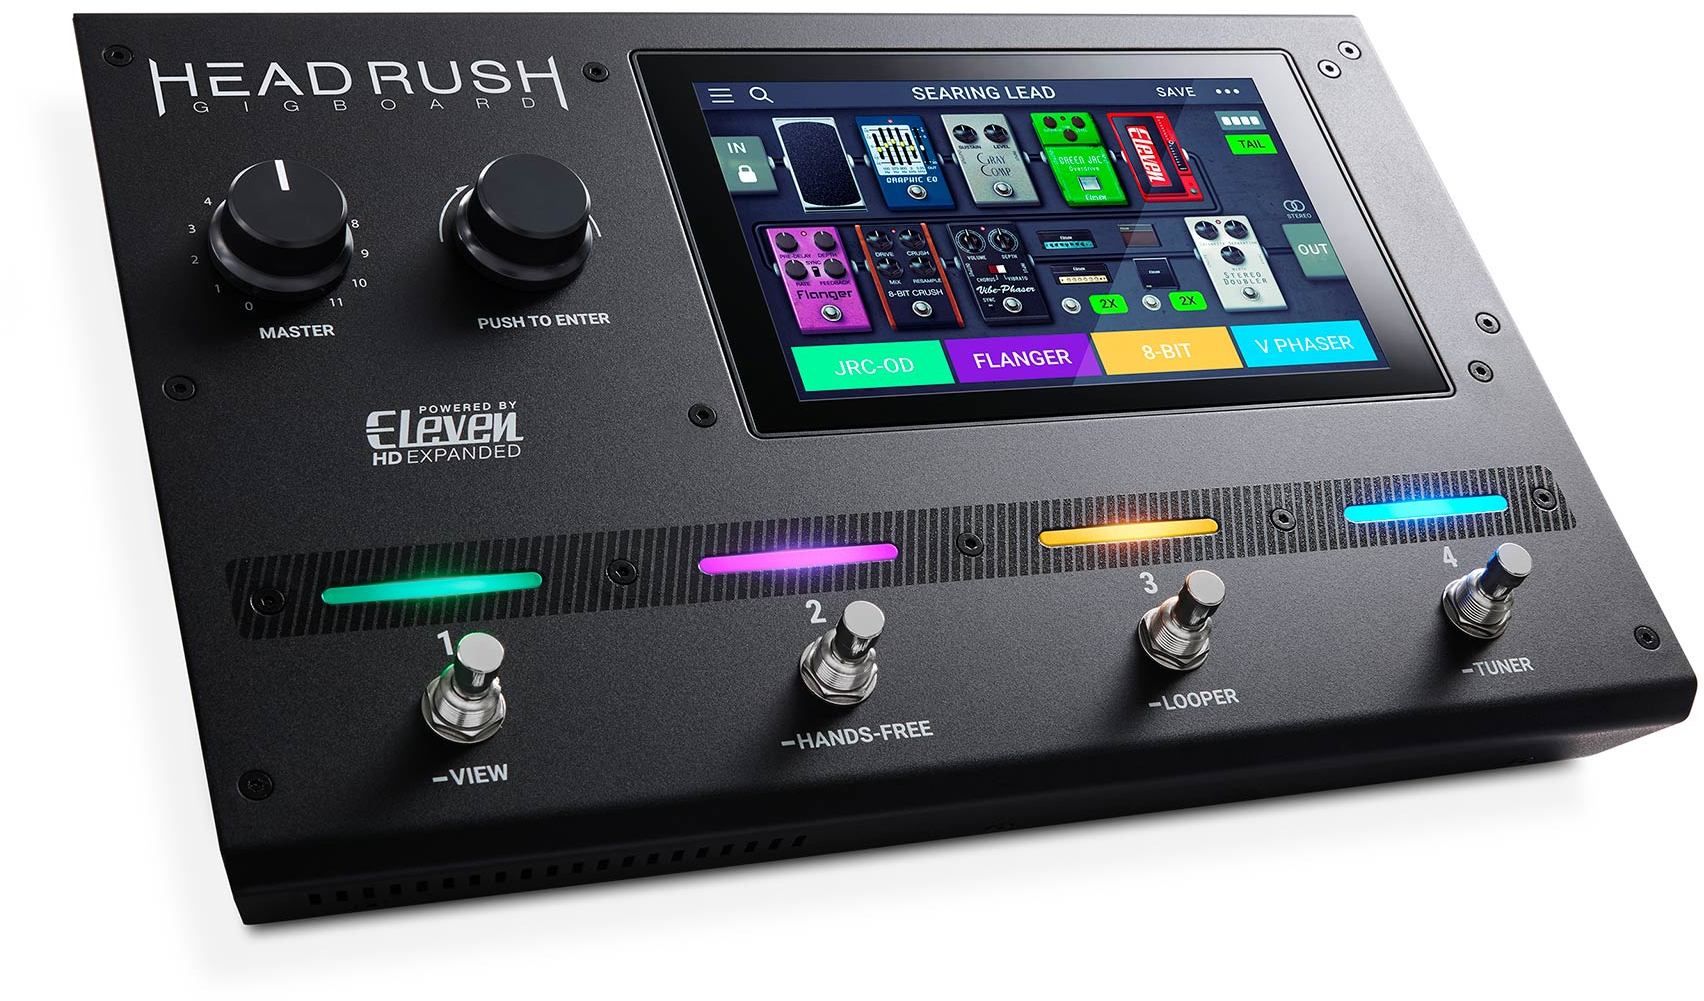 ‌HeadRush GIGBOARD The most powerful guitar FX and amp modeler ever in a  4-footswitch configuration.